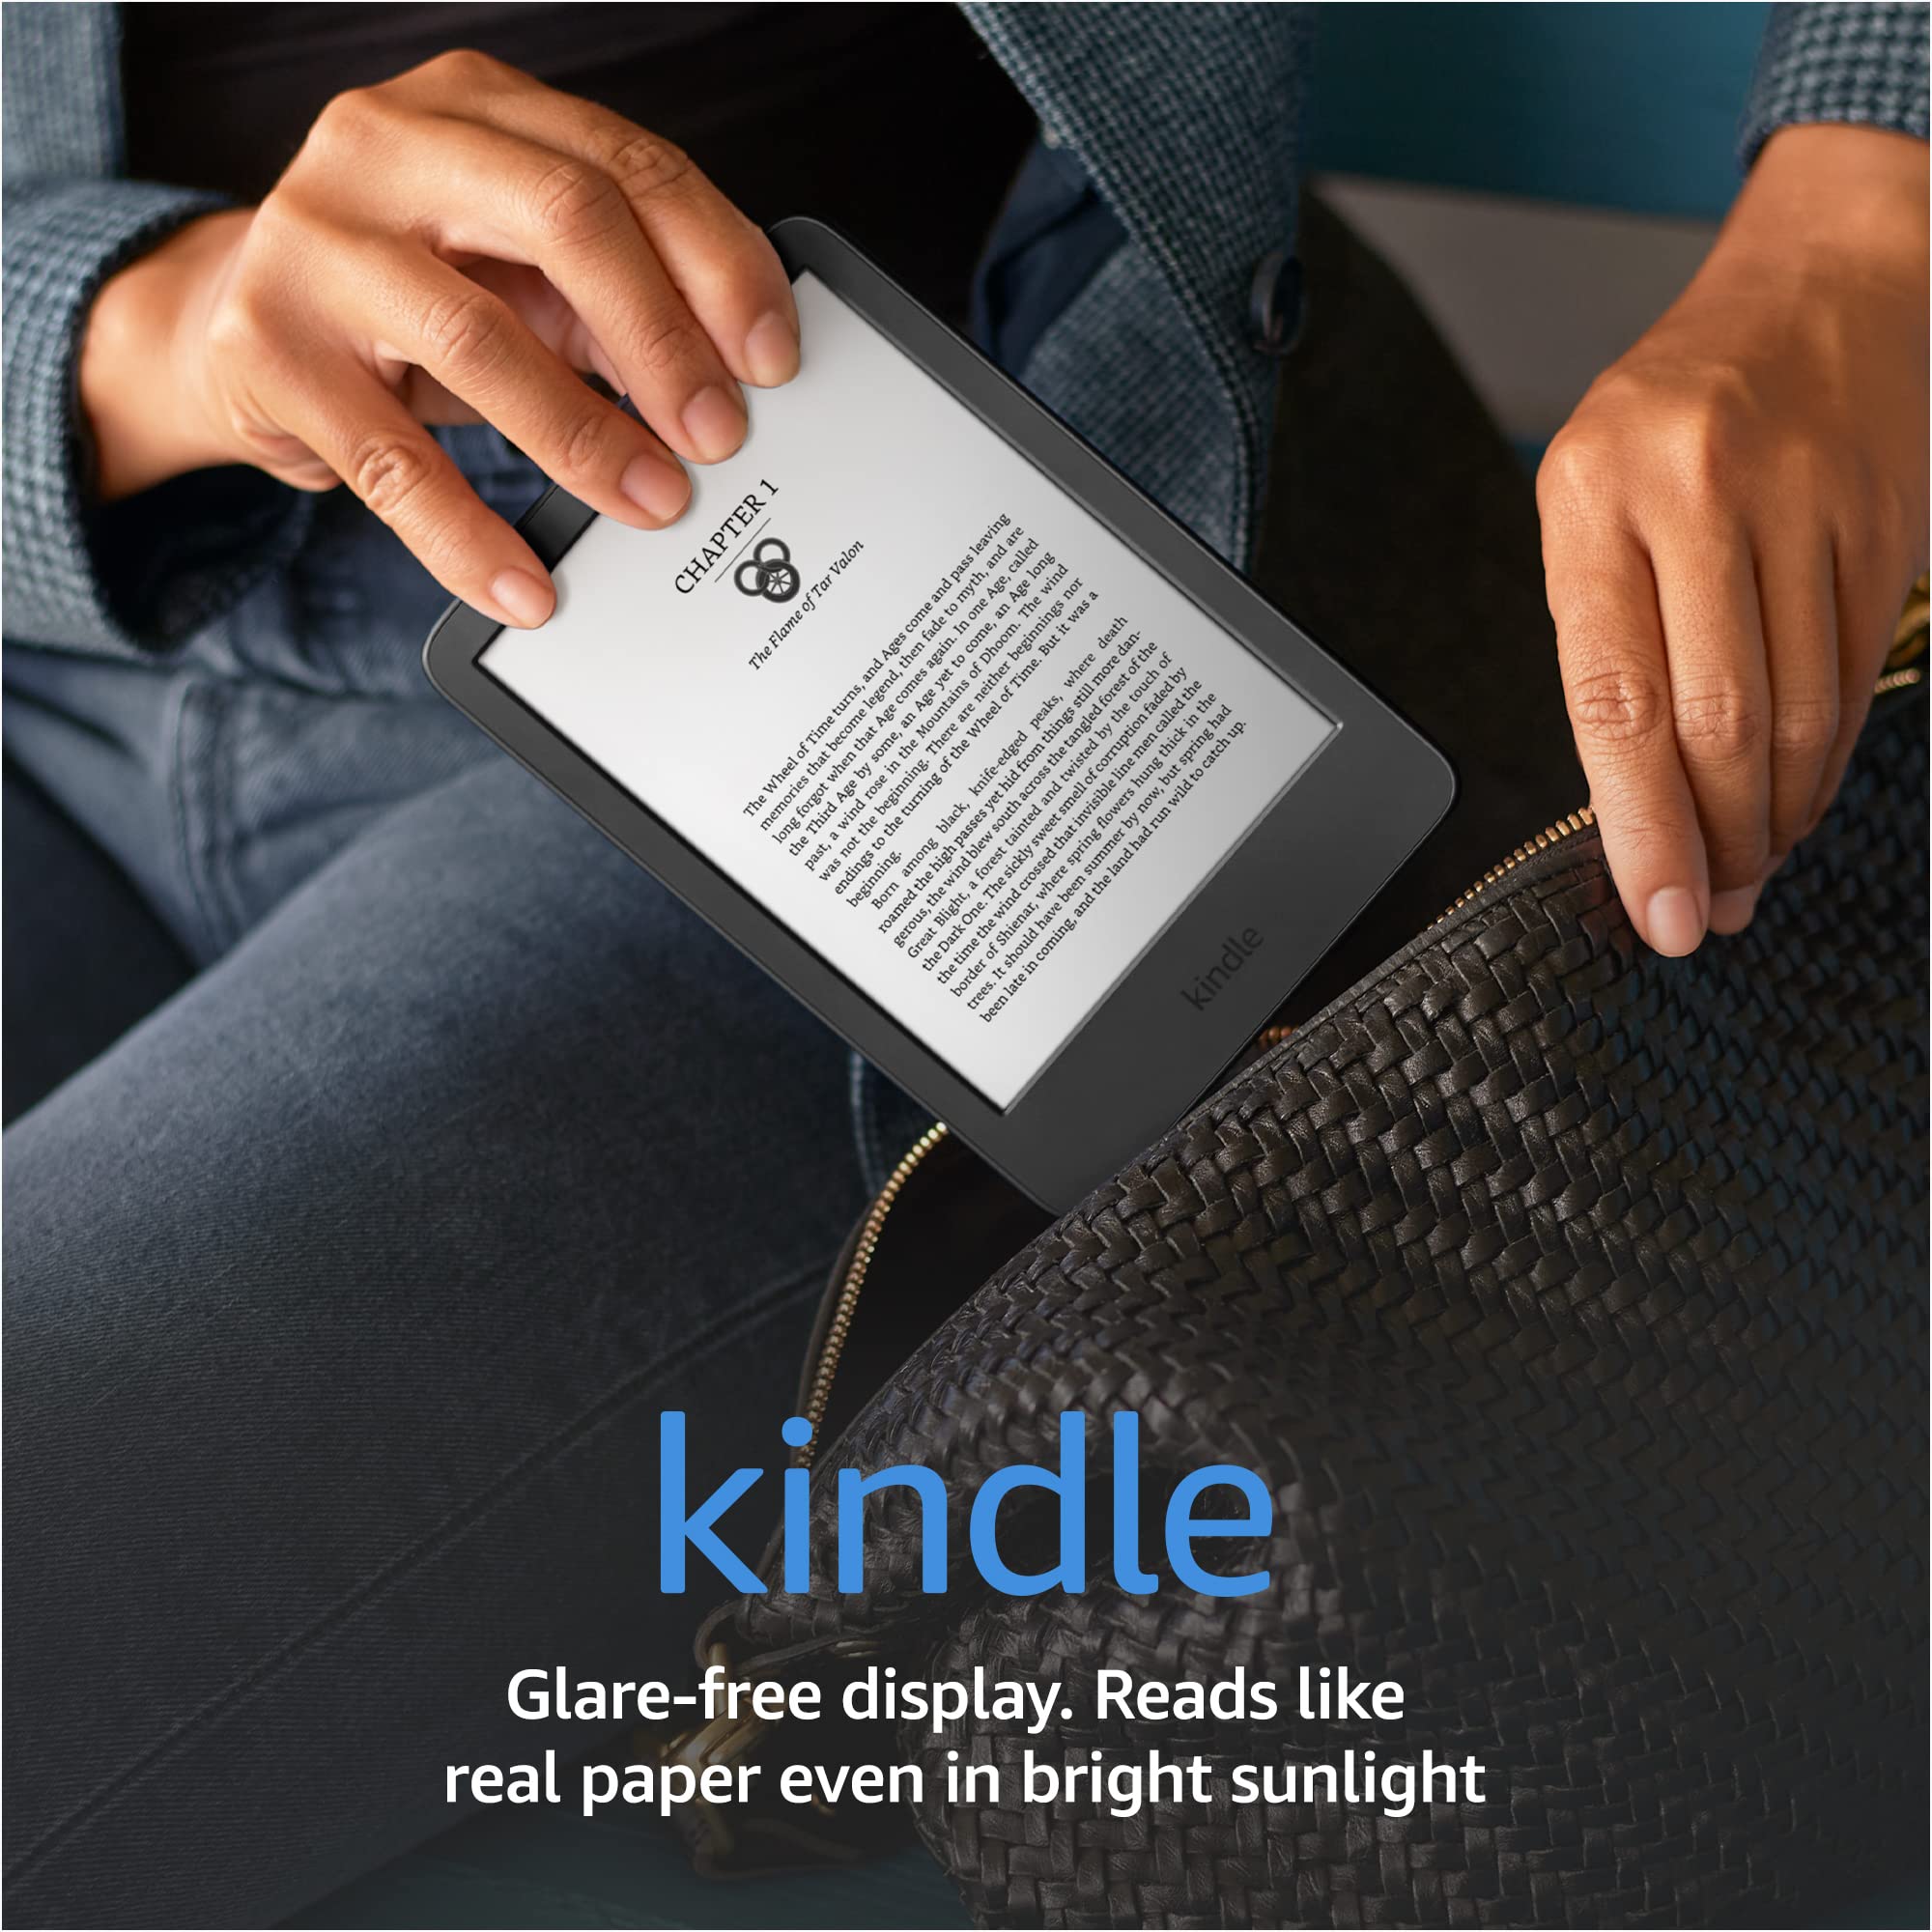 Kindle (2022 release) – The lightest and most compact Kindle, up to 6 weeks of battery life, glare-free display with adjustable front light, and 16 GB storage – Without Lockscreen Ads - Black